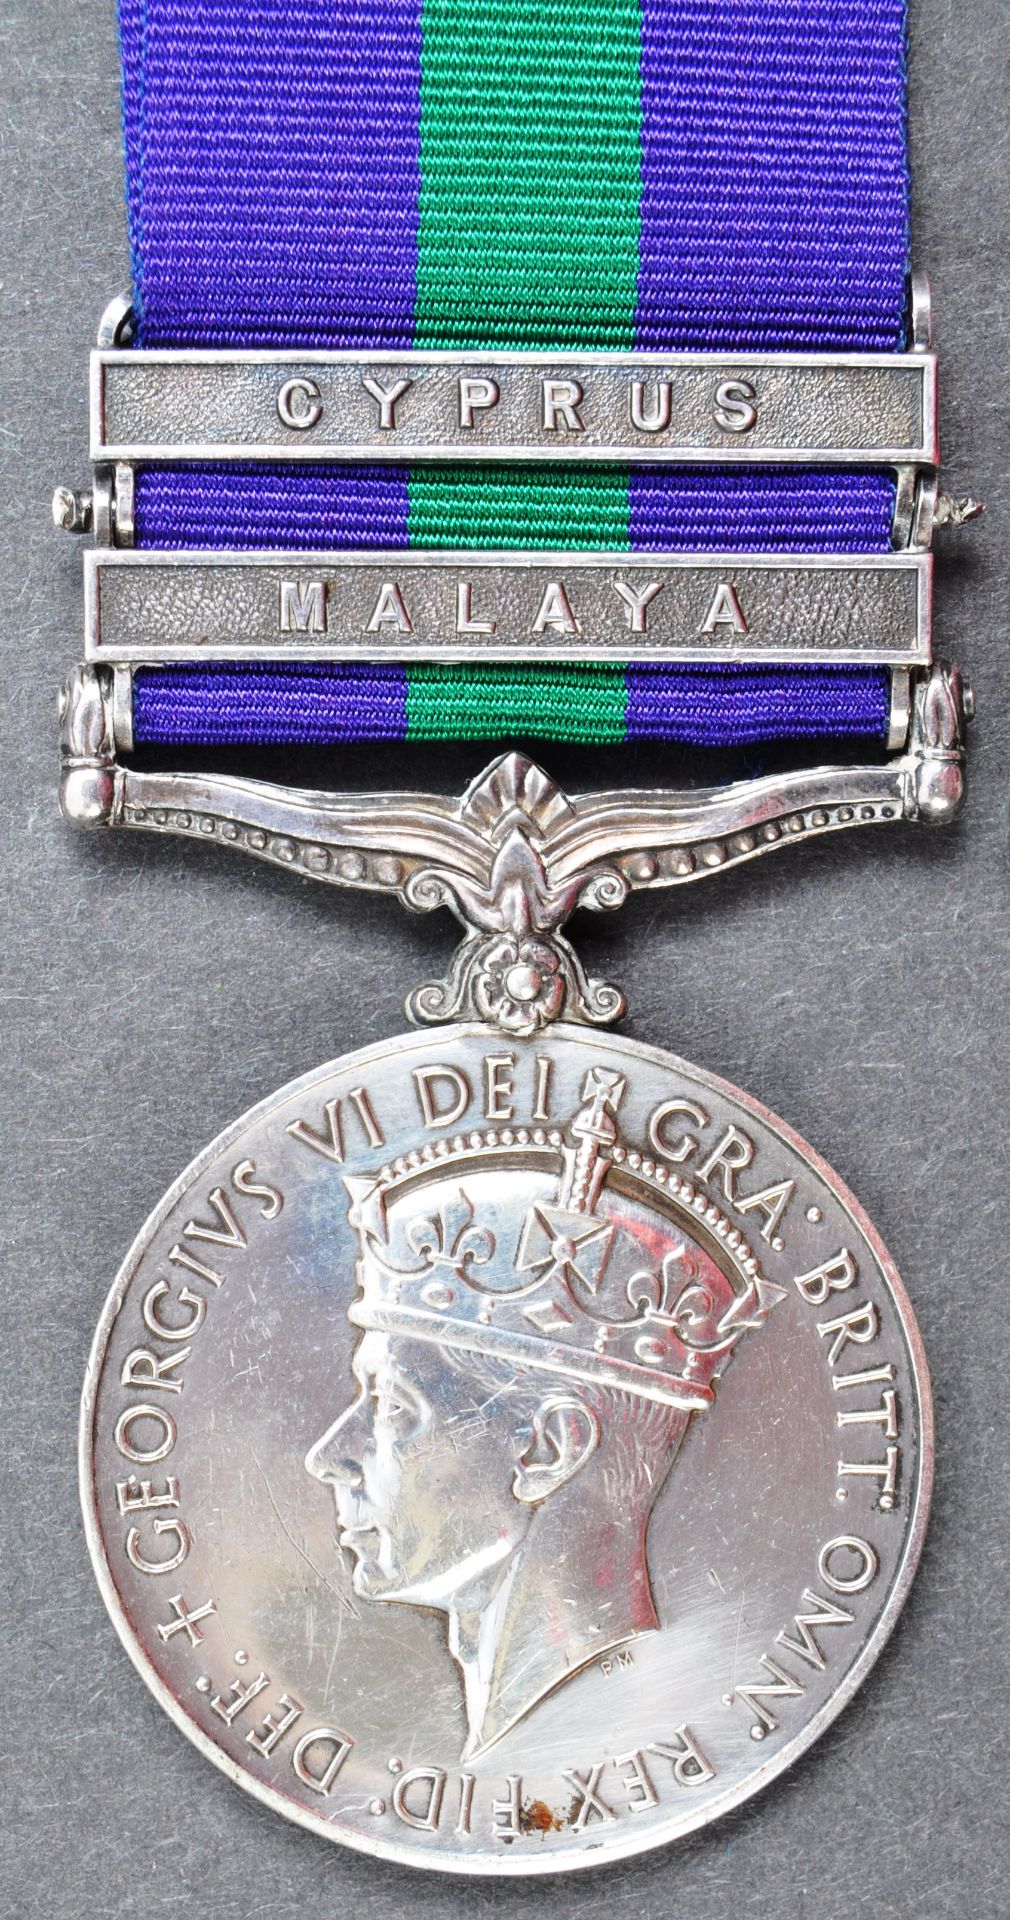 WWII SECOND WORLD WAR MEDAL GROUP - ROYAL ARTILLERY - MALAYA - Image 2 of 5